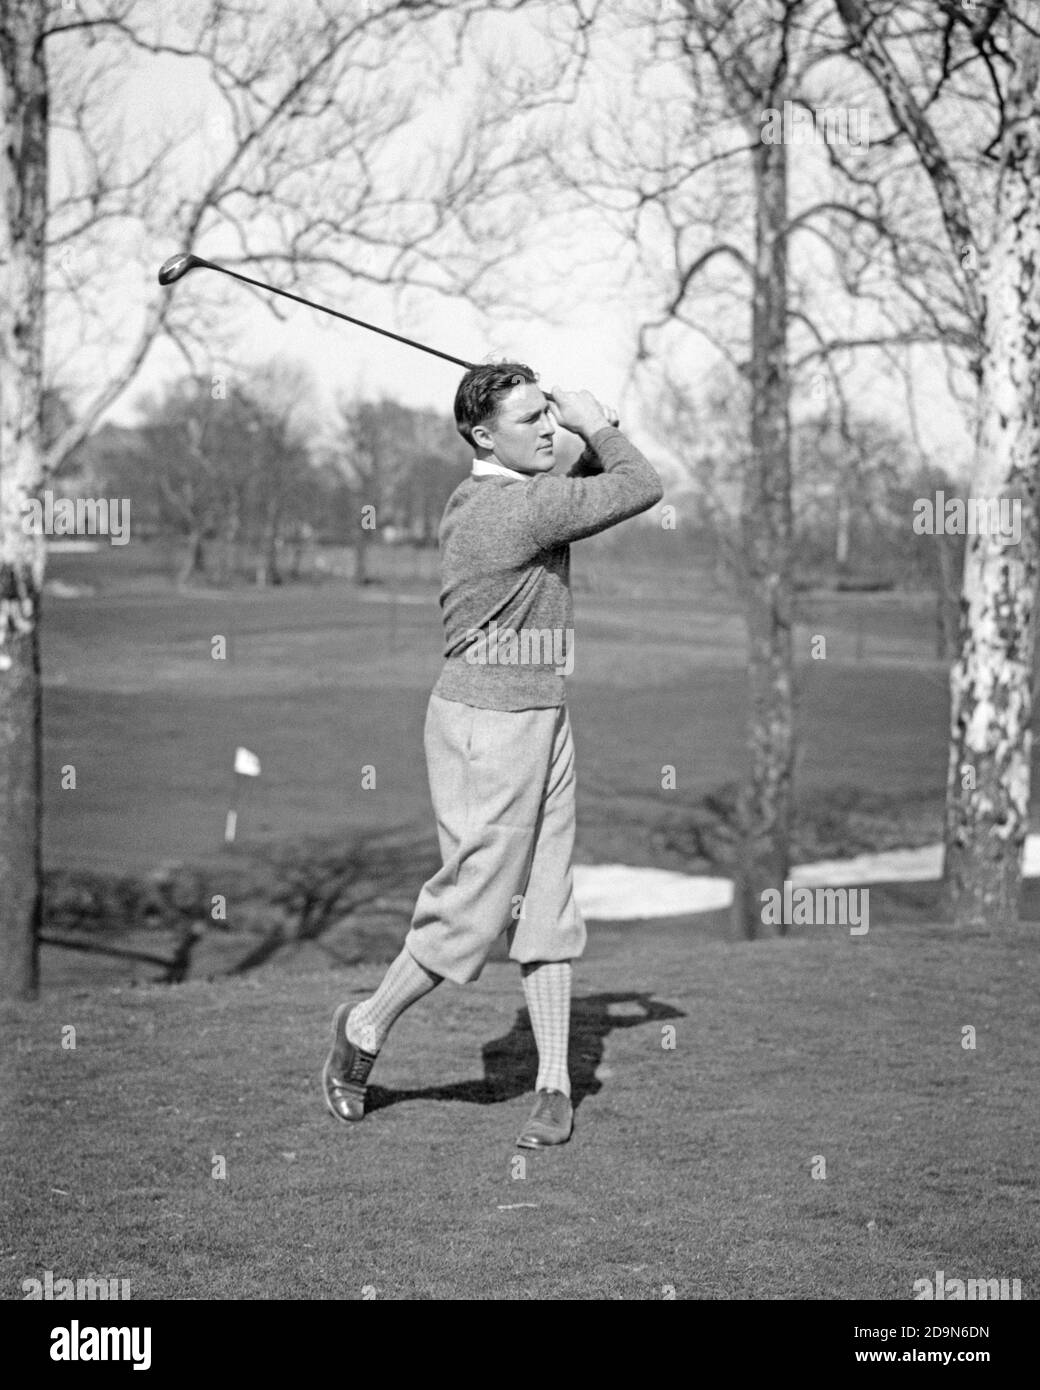 1930s SPORTS MAN GOLFER WEARING SWEATER AND PLUS FOURS BREECHES STRIKING HITTING GOLF BALL WITH WOODEN DRIVER CLUB - g1652 HAR001 HARS COPY SPACE FULL-LENGTH PHYSICAL FITNESS PERSONS MALES GOLFING ATHLETIC CONFIDENCE B&W HITTING GOALS SKILL ACTIVITY AMUSEMENT HAPPINESS PHYSICAL WELLNESS GOLFERS HOBBY LEISURE STRENGTH TROUSERS STRATEGY INTEREST AND CHOICE HOBBIES KNOWLEDGE PROGRESS RECREATION PASTIME FAIRWAY PLEASURE CONCEPTUAL ESCAPE FLEXIBILITY LINKS MUSCLES STYLISH PLUS FOURS GROWTH MID-ADULT MID-ADULT MAN PRECISION RELAXATION STRIKING AMATEUR BLACK AND WHITE BREECHES CAUCASIAN ETHNICITY Stock Photo